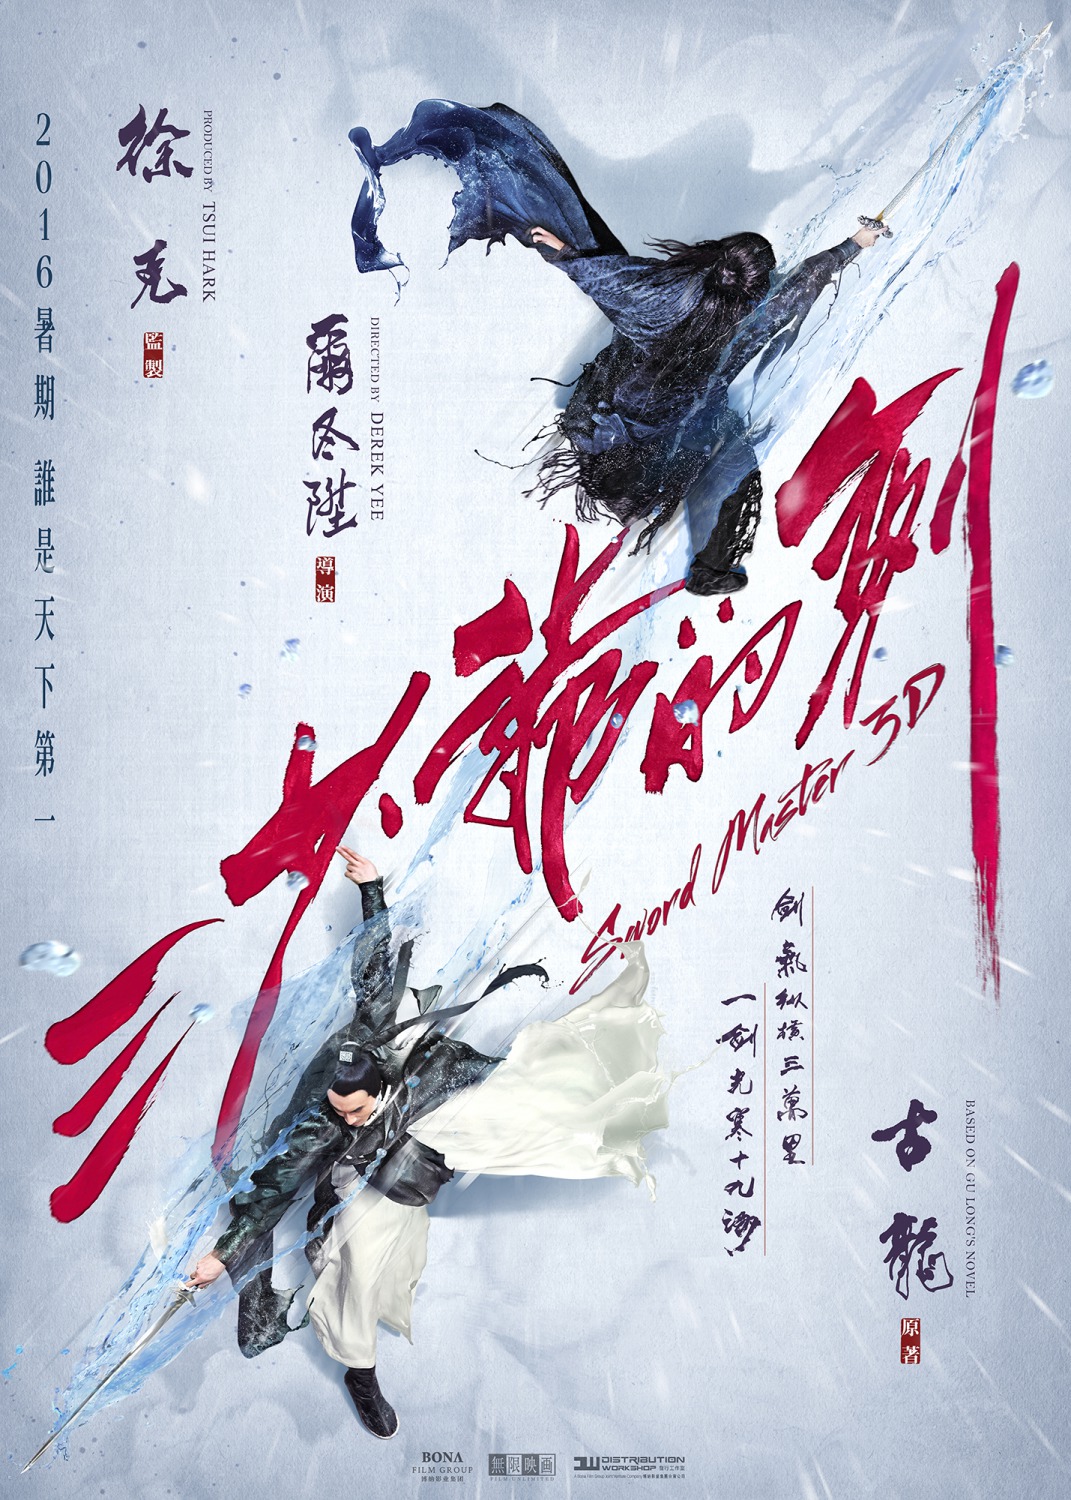 Extra Large Movie Poster Image for San shao ye de jian (#10 of 11)